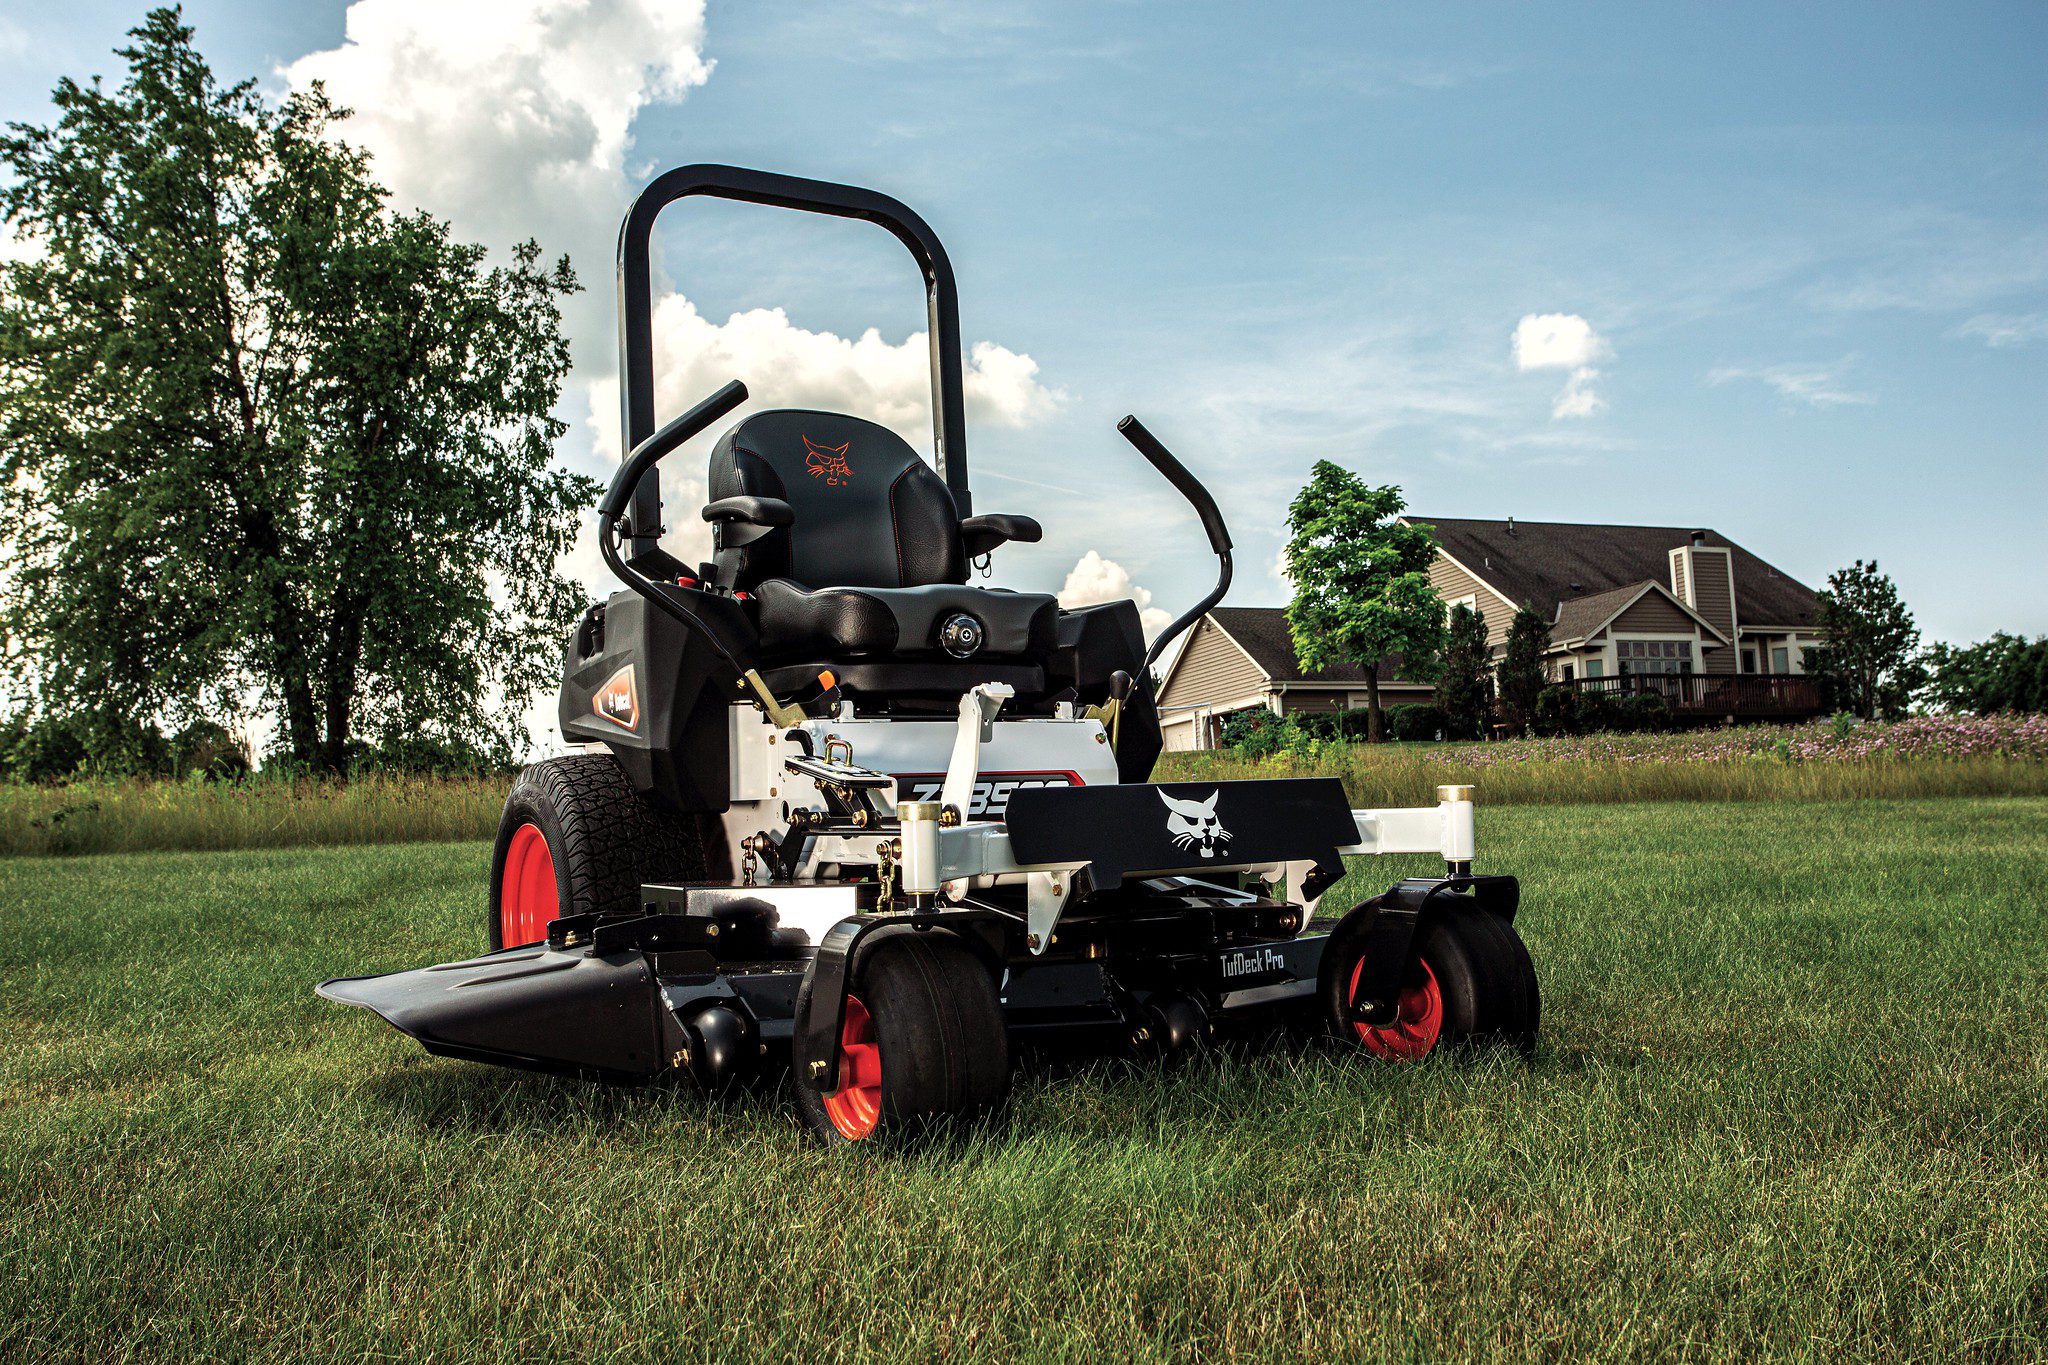 Browse Specs and more for the Bobcat ZT3500 Zero-Turn Mower 52″ - Bobcat of Indy